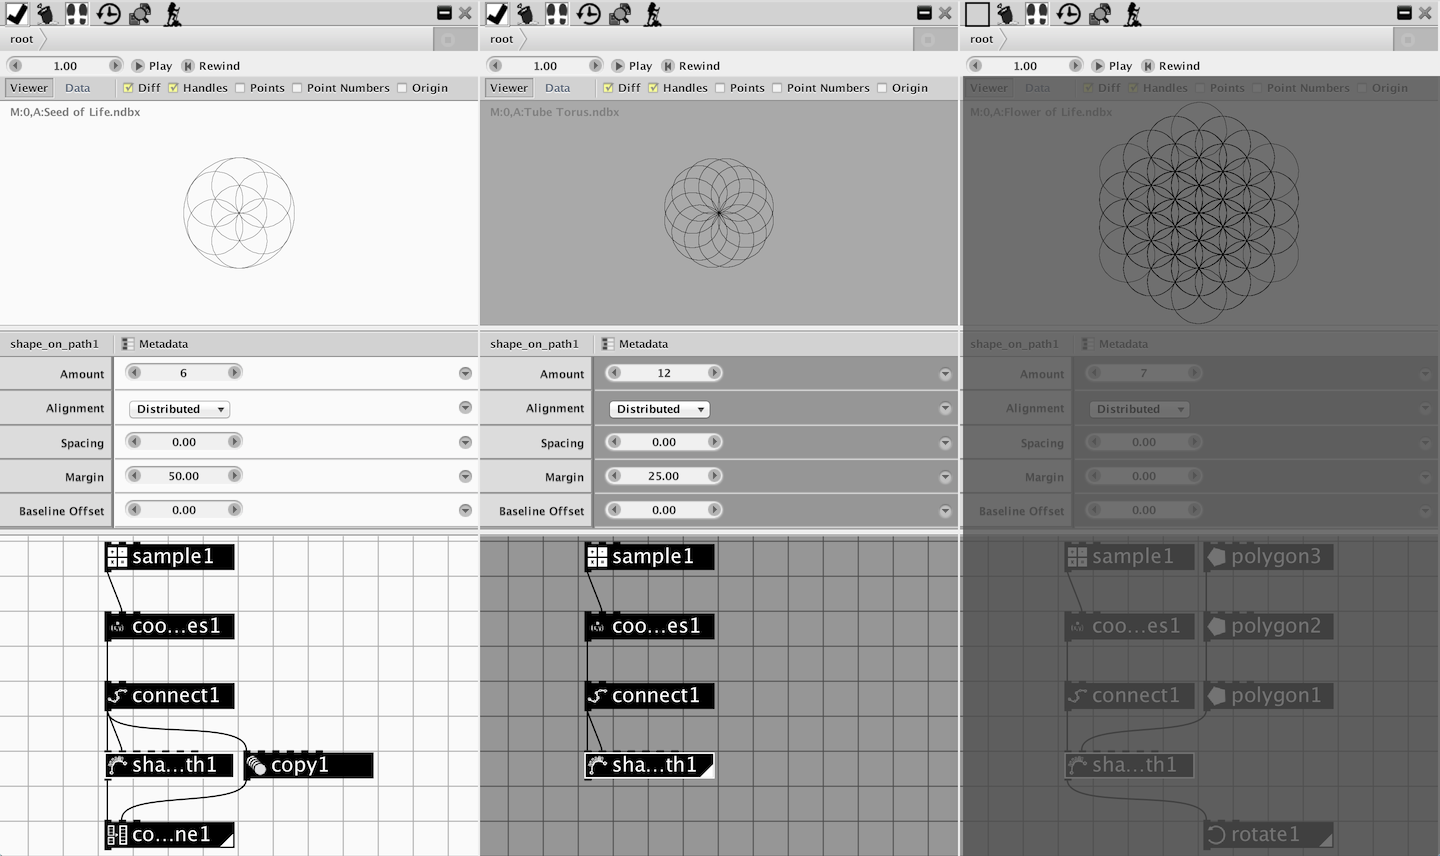 GEM-NI: A System for Creating and Managing Alternatives In Generative Design